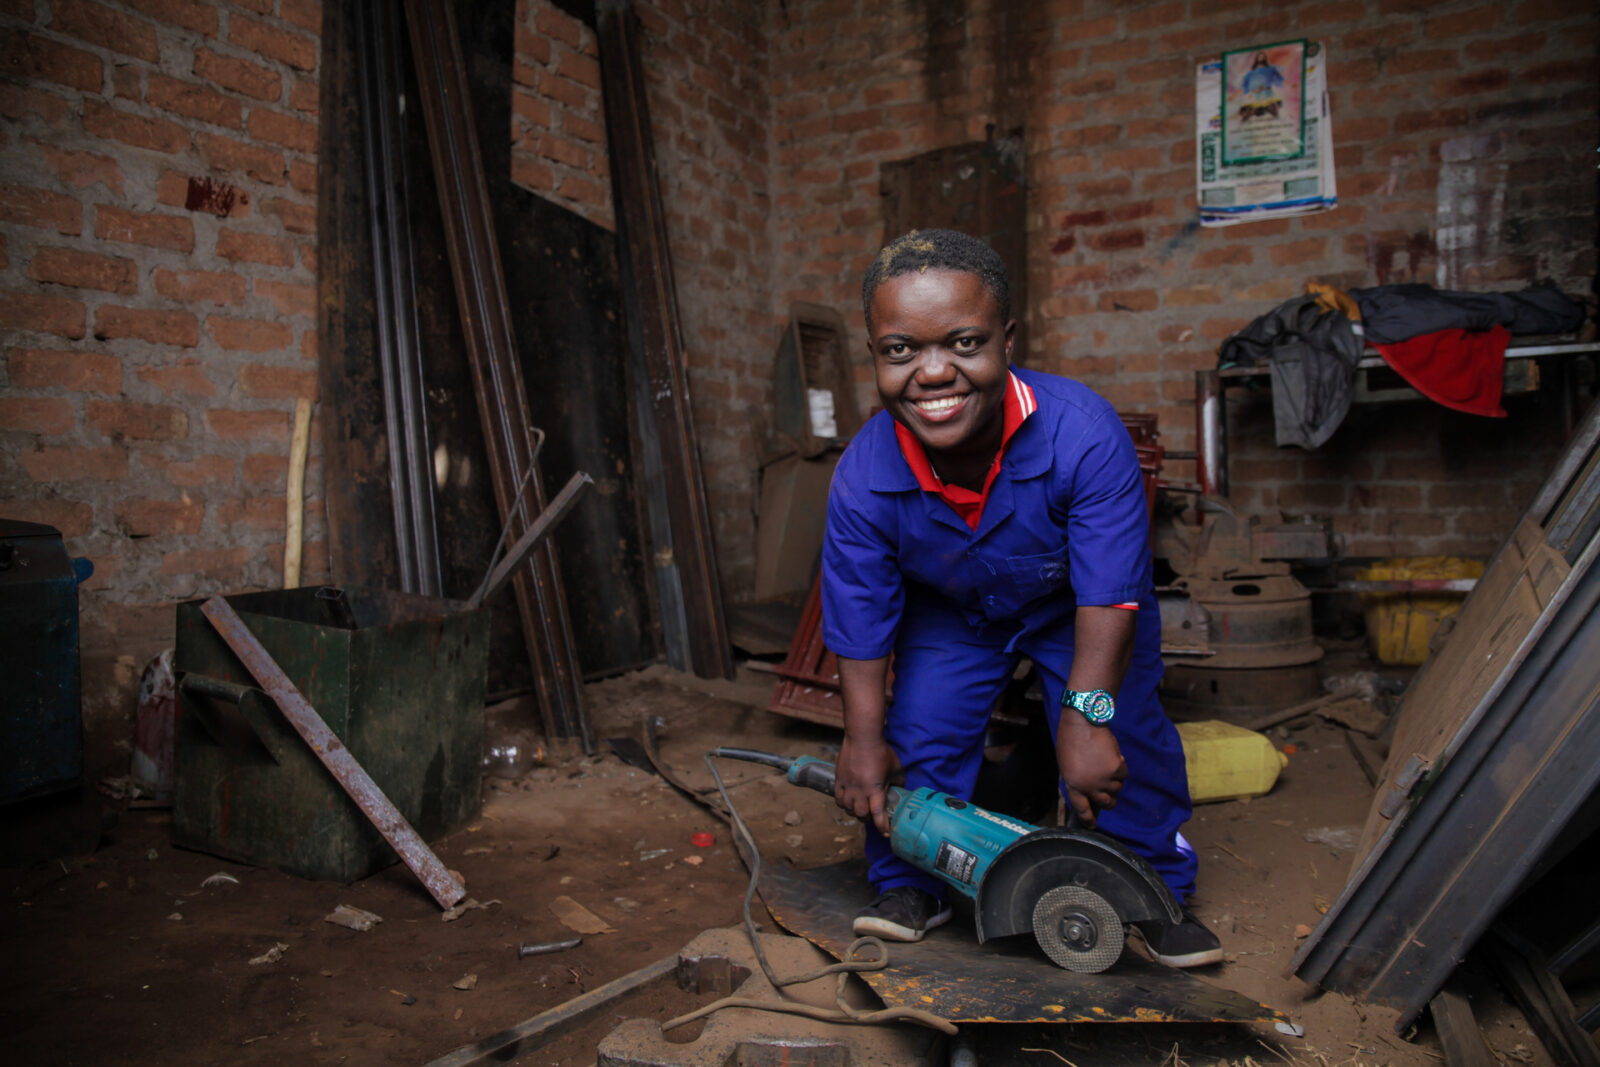 A man with dwarfism is pictured in a workshop, smiling as he uses a saw to cut a piece of metal.